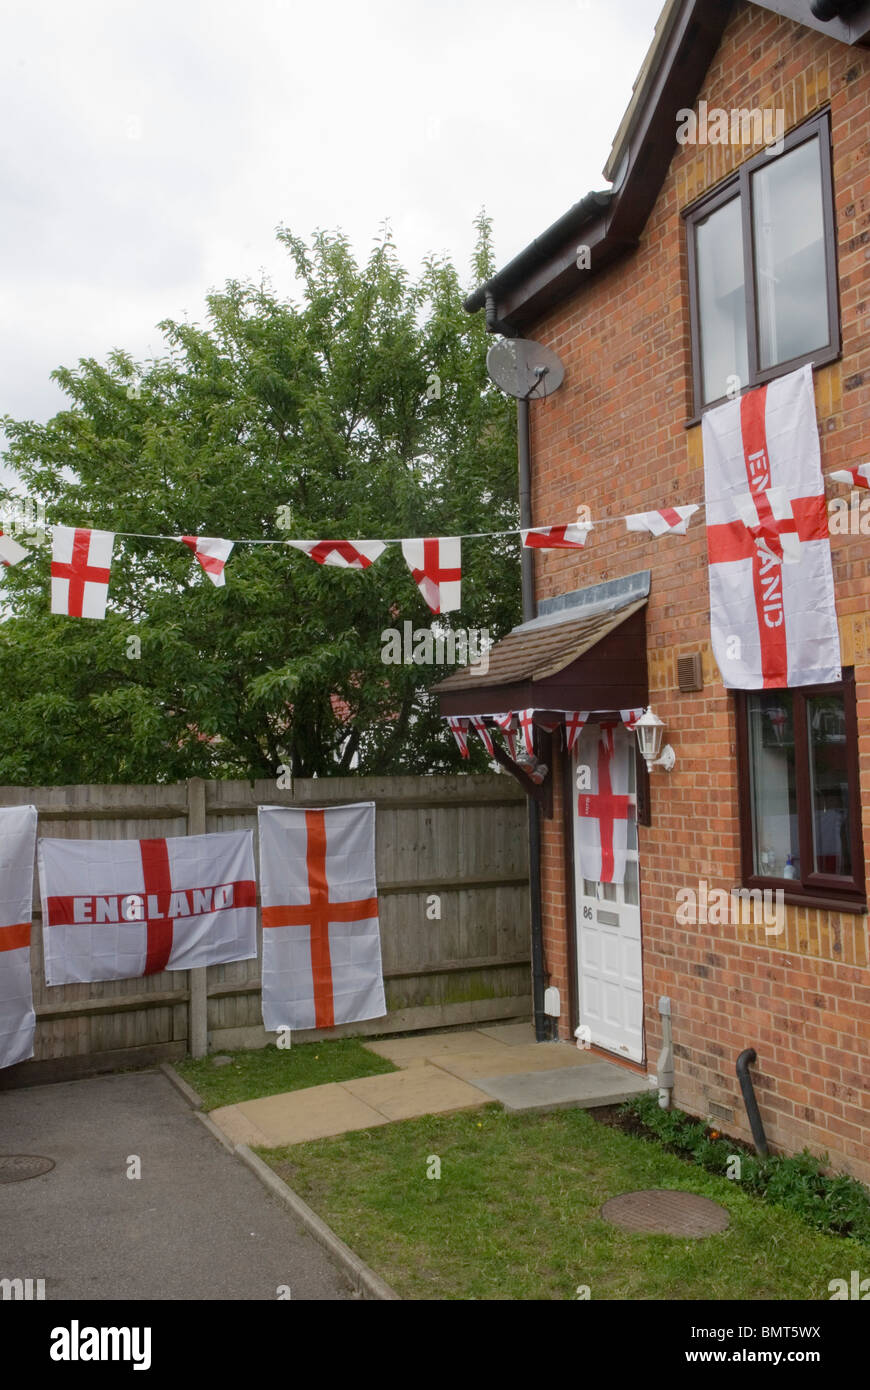 English flag flags decorated house football world cup excitement. London 2010 2010s UK England HOMER SYKES Stock Photo